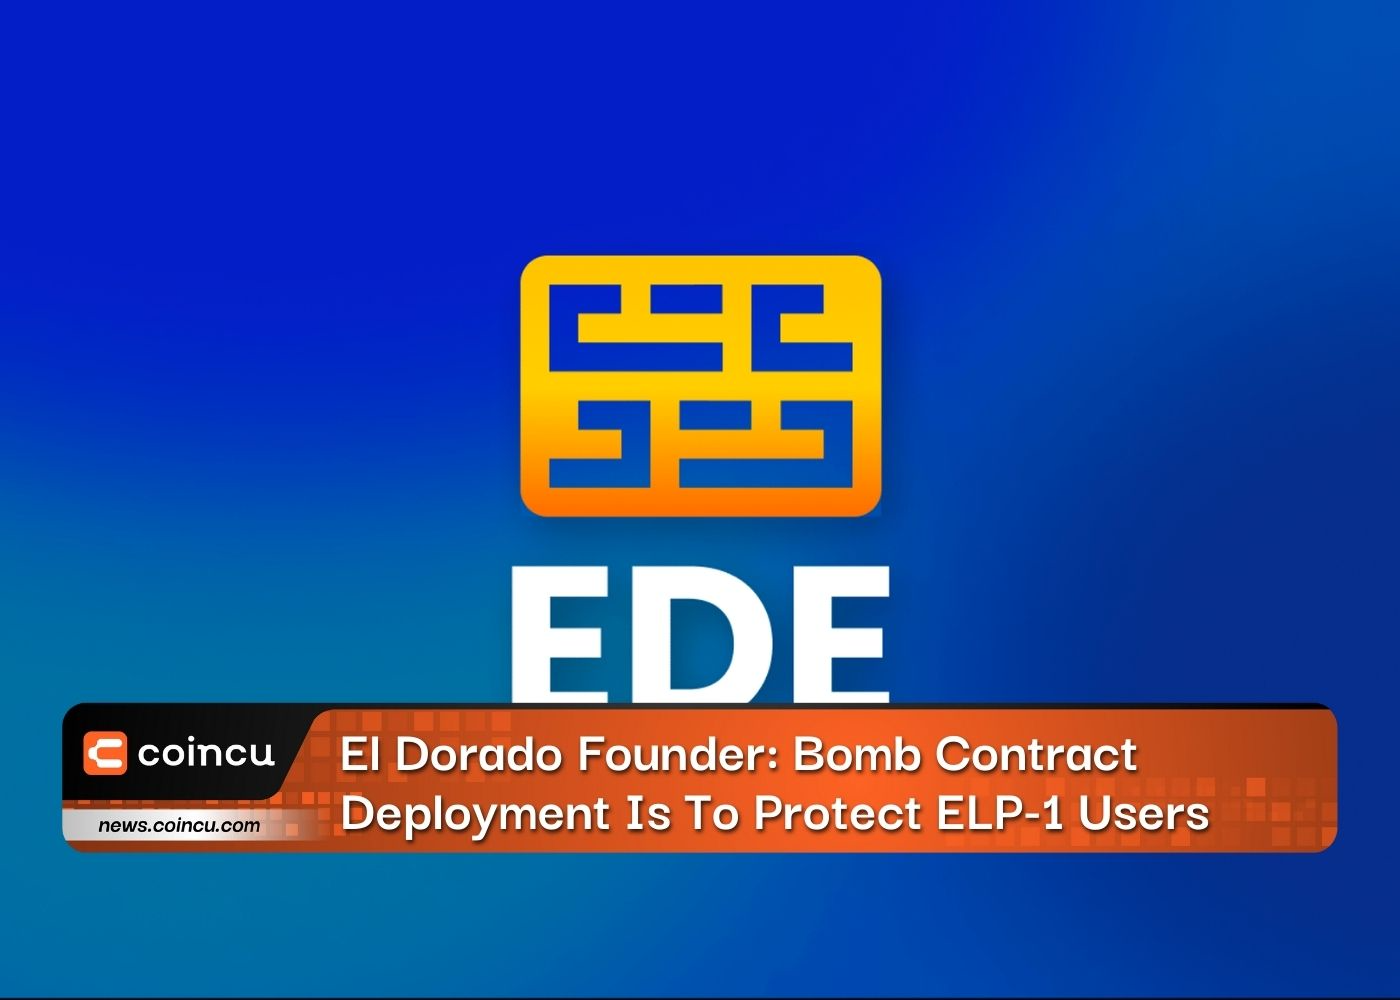 El Dorado Founder: Bomb Contract Deployment Is To Protect ELP-1 Users